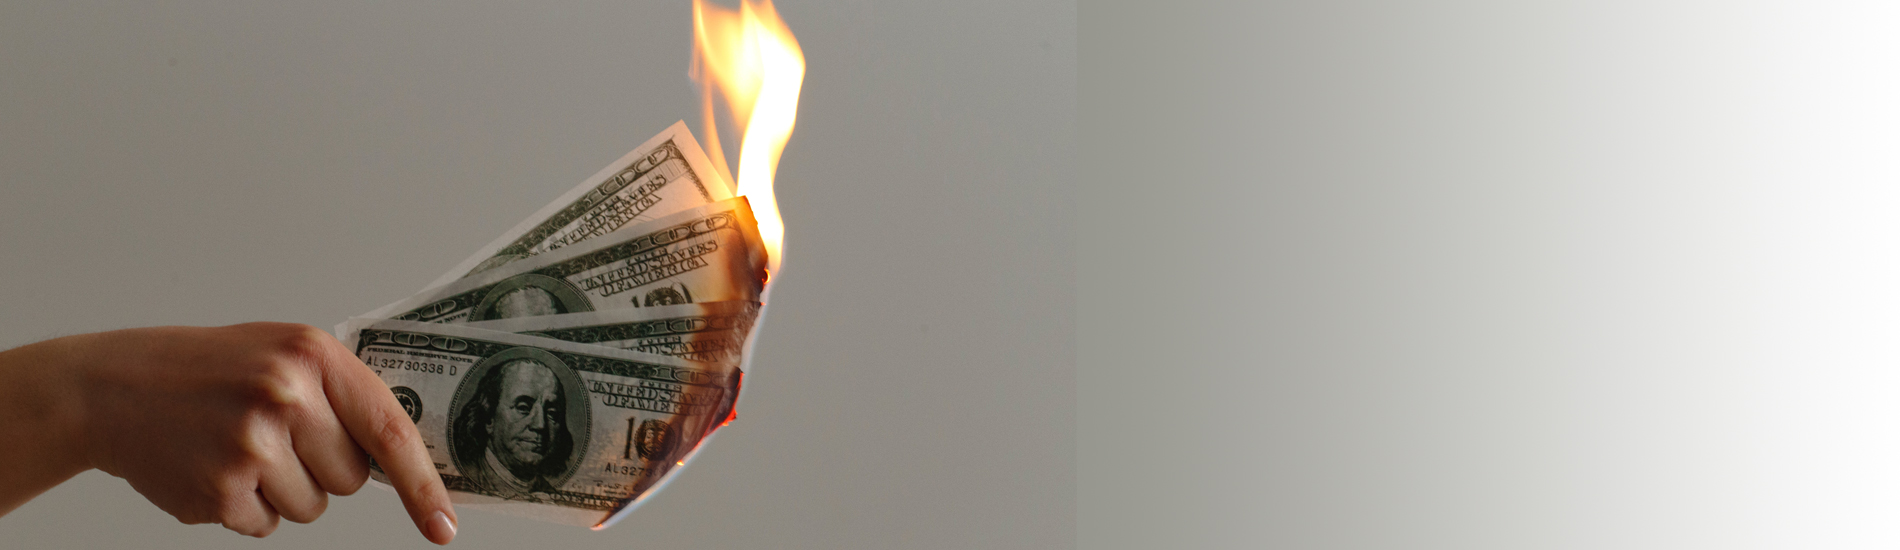 Money is burned implying the anti corruption